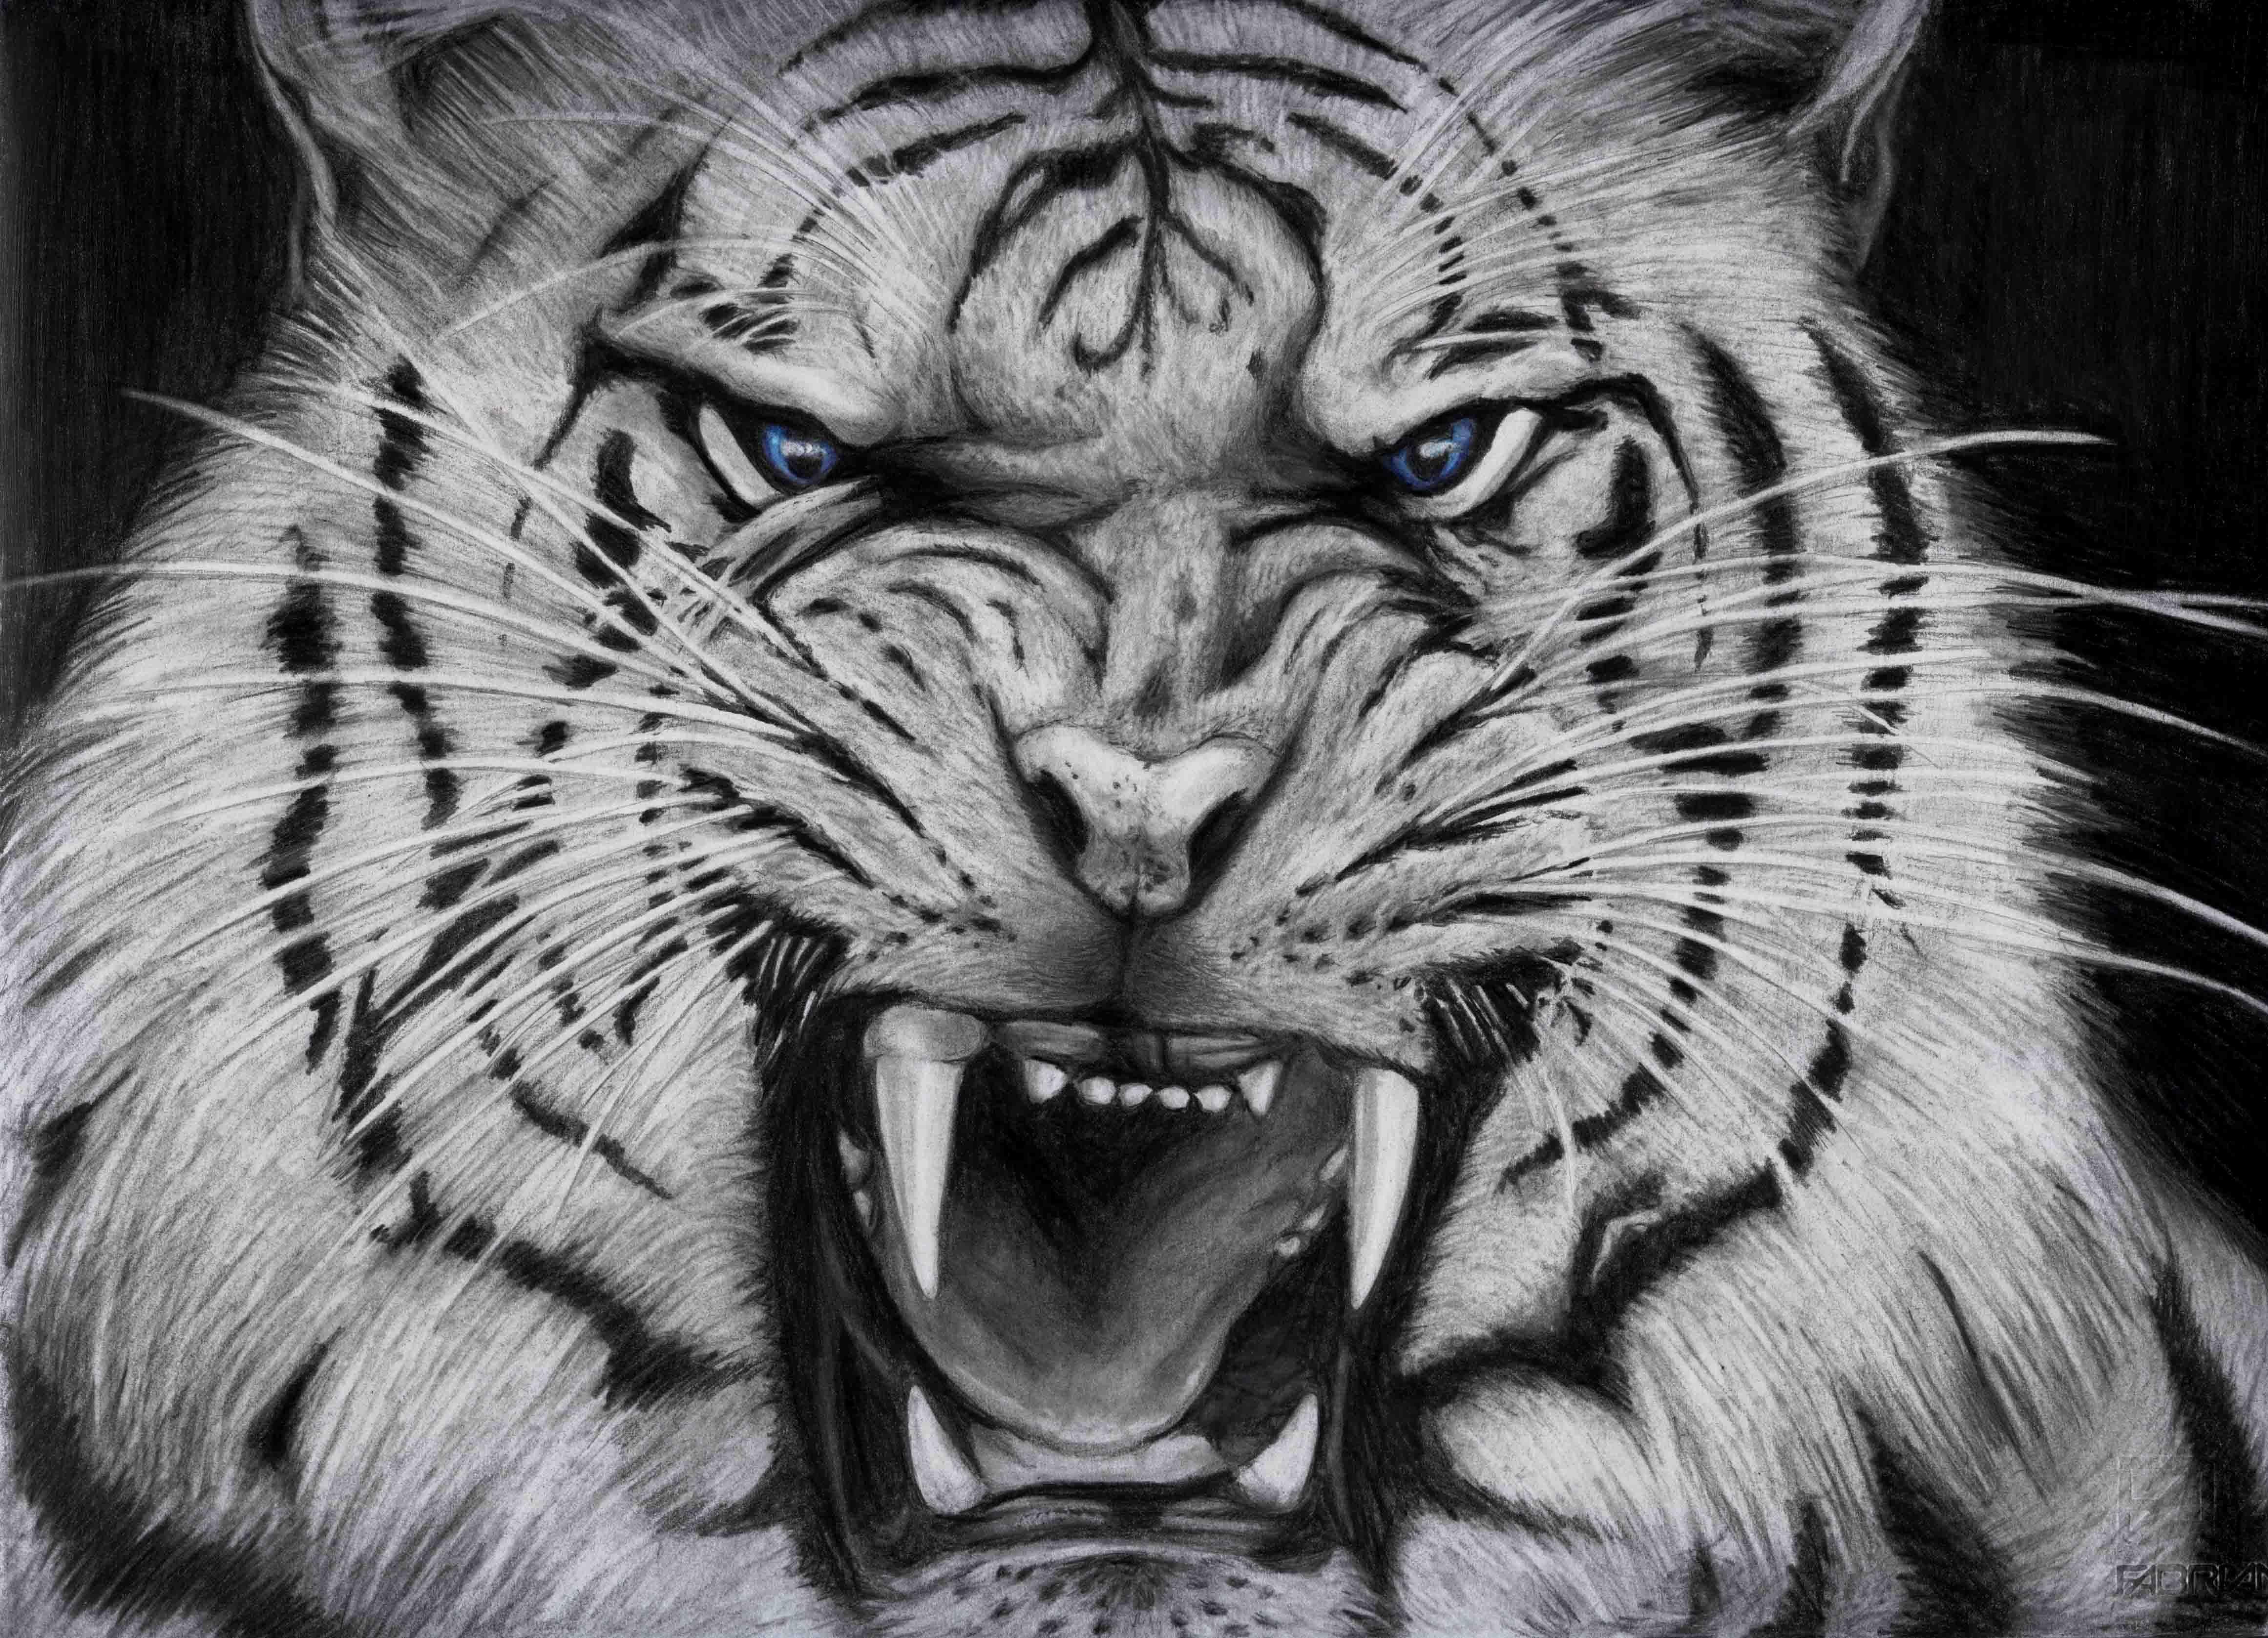 Cool White Tigers wallpaper background. Tiger wallpaper